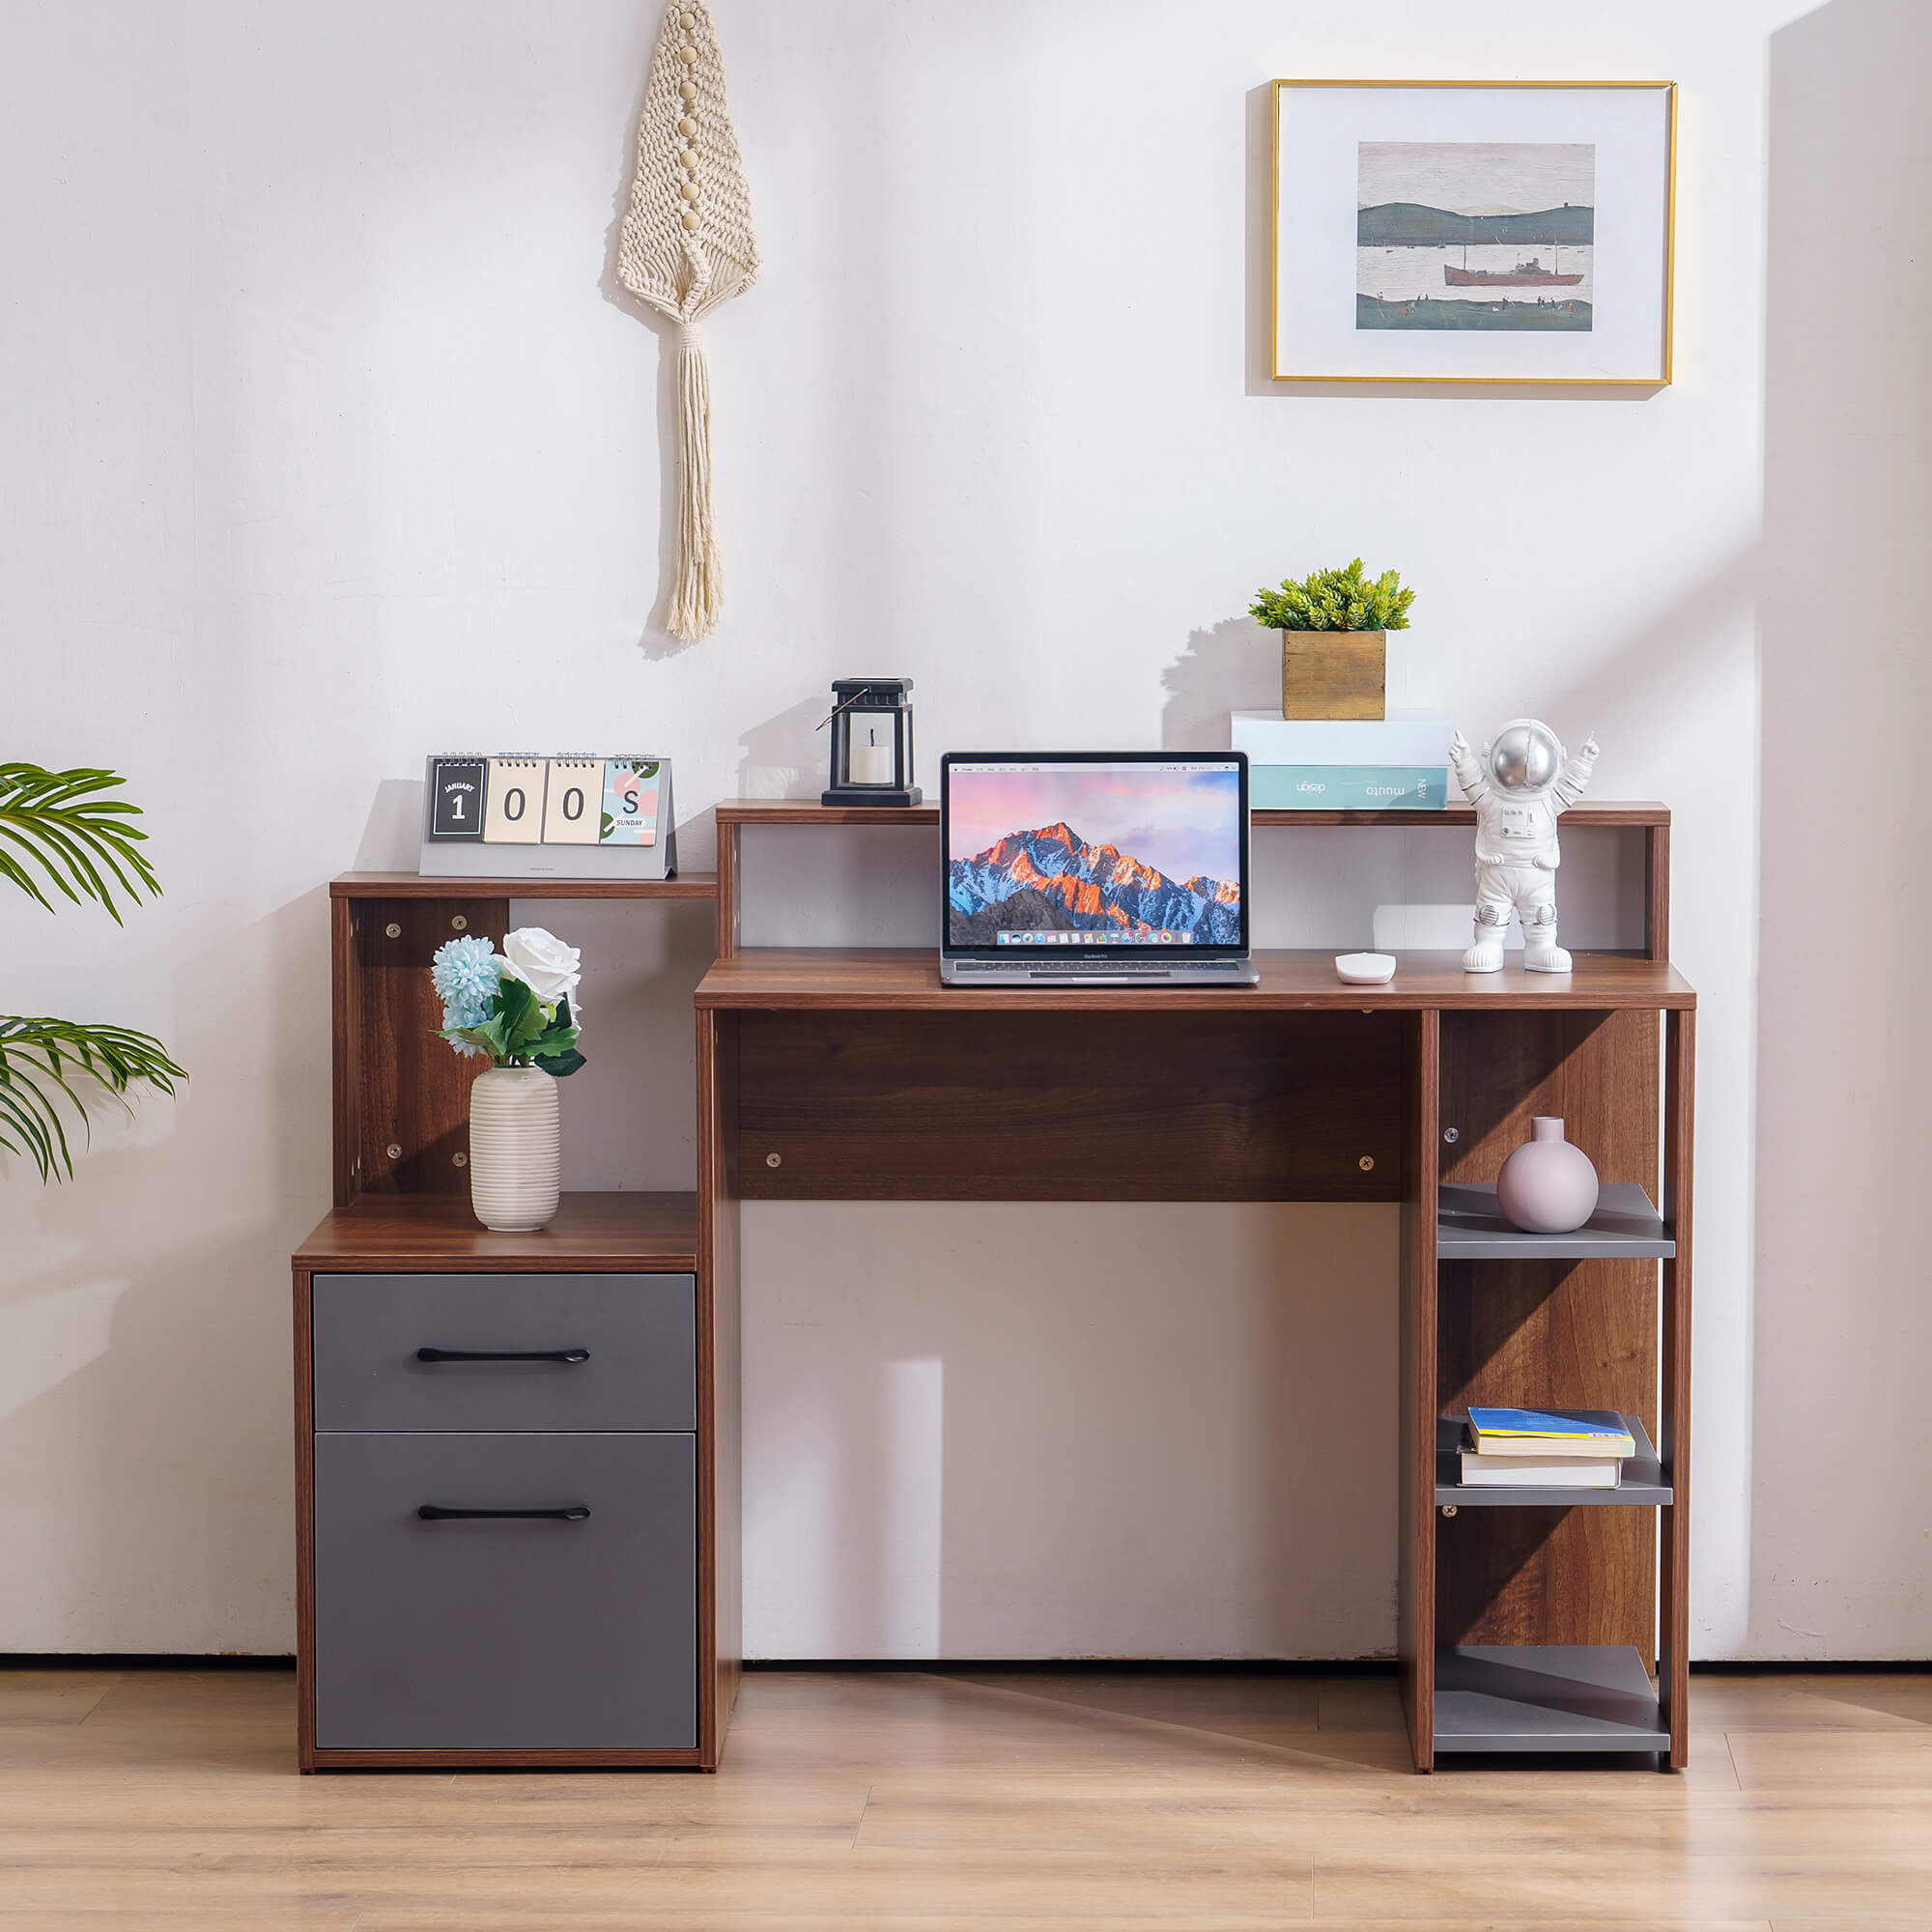 ivinta Computer Desk with Shelves, Office Desk for Living Room,Small Desk  with Storage Space, Home Office Desks, Vanity Desk with Gold Legs PC Laptop